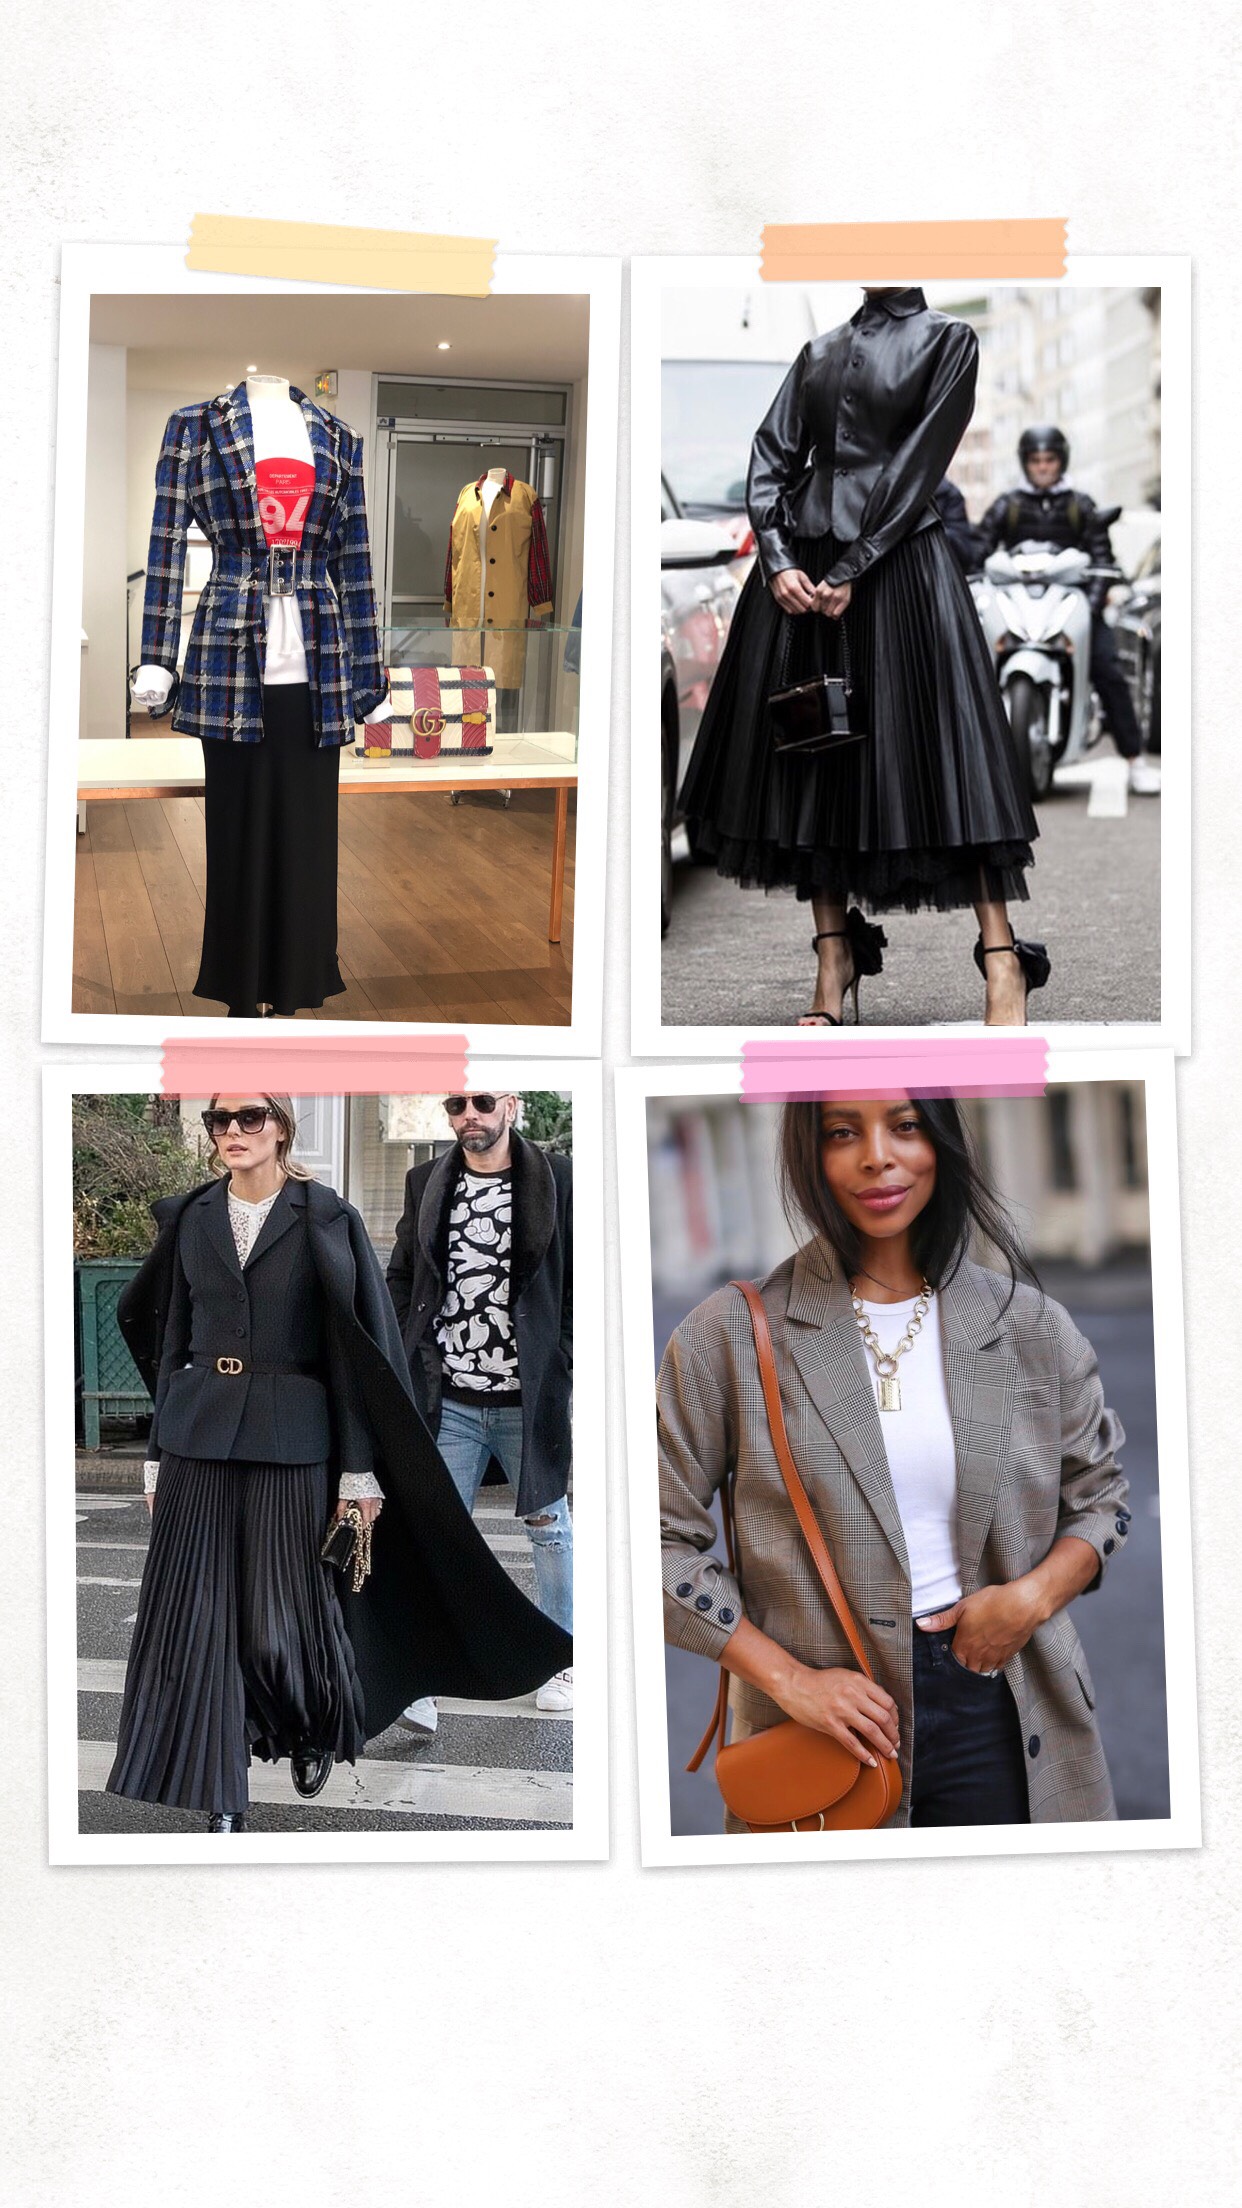 You are currently viewing TENDANCE MODE AUTOMNAL 2019 : VITE, UN LOOK